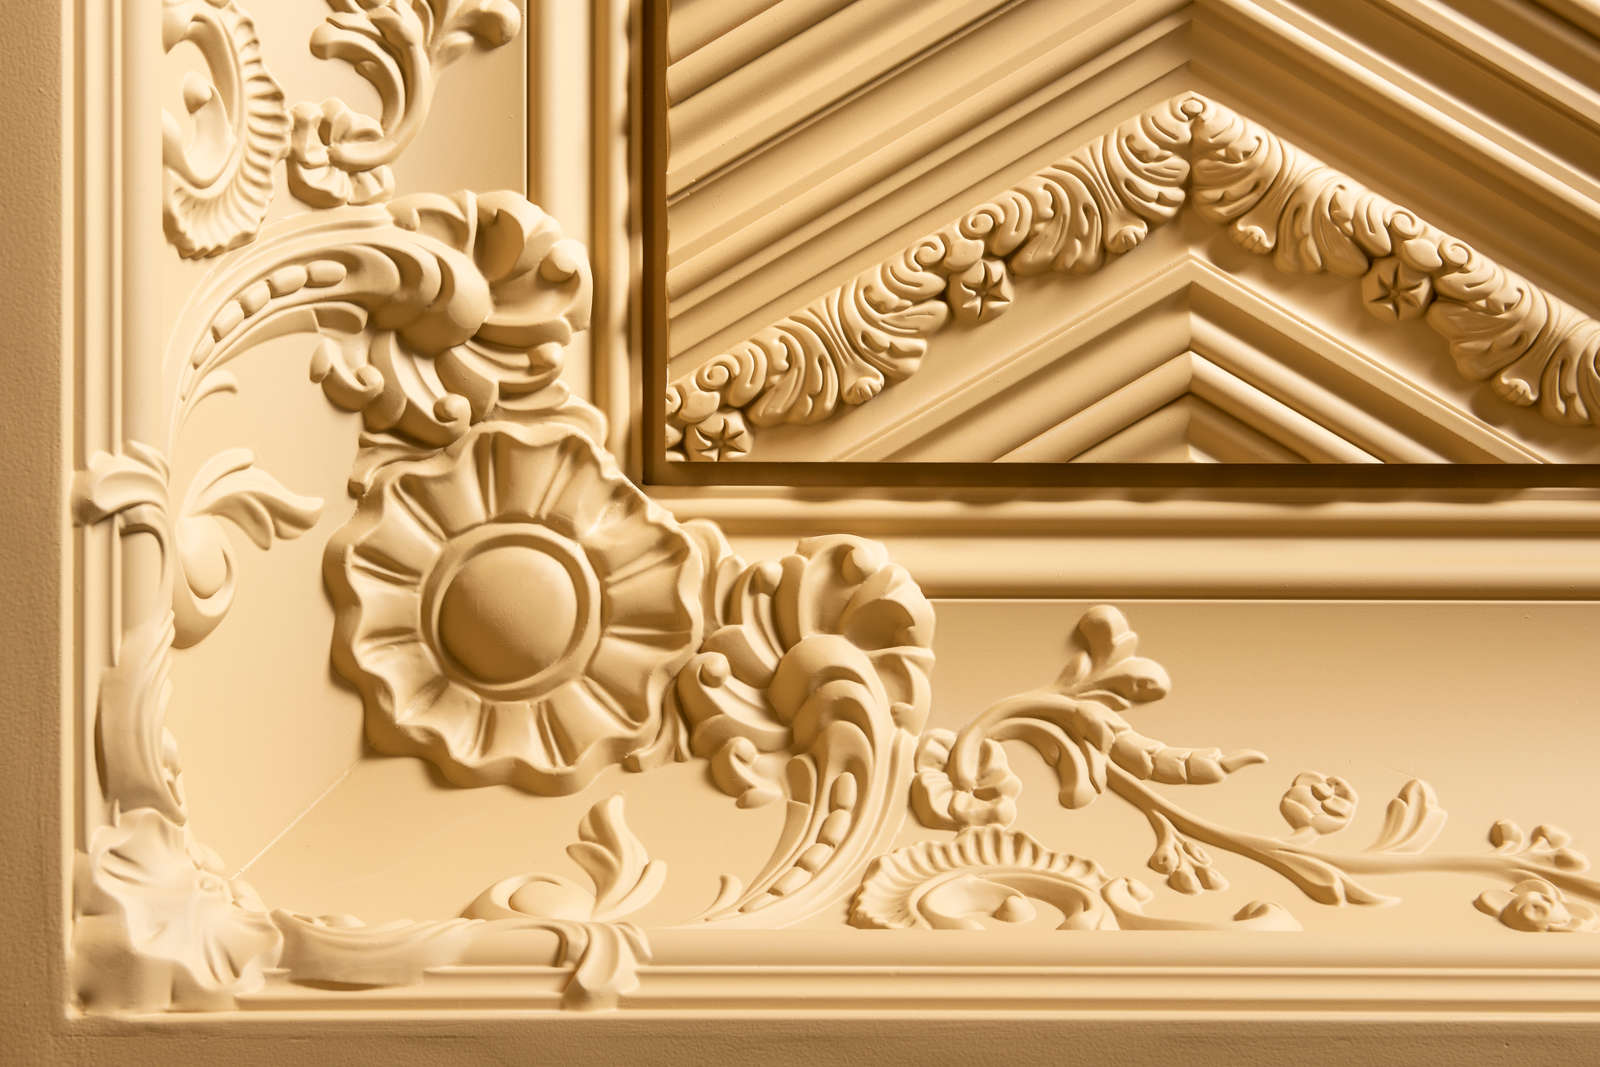             Decorative stucco moulding Moscow - C338B
        